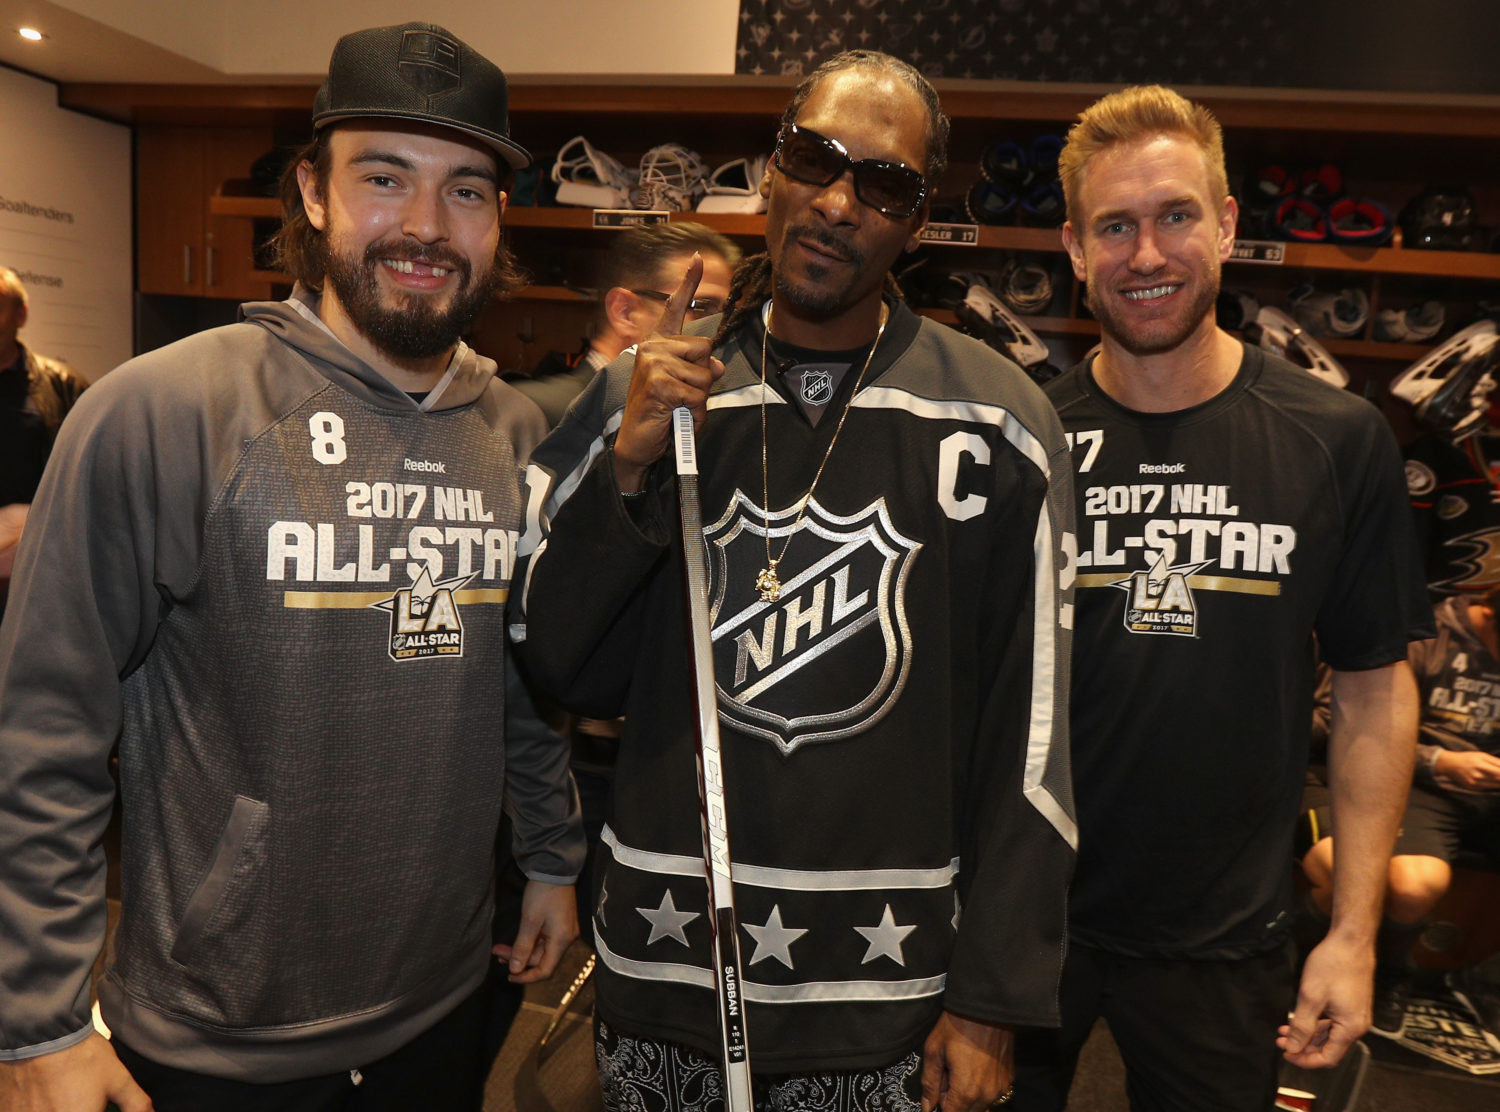 LA Kings Awarded 2017 All Star Game For 50th Anniversary - St